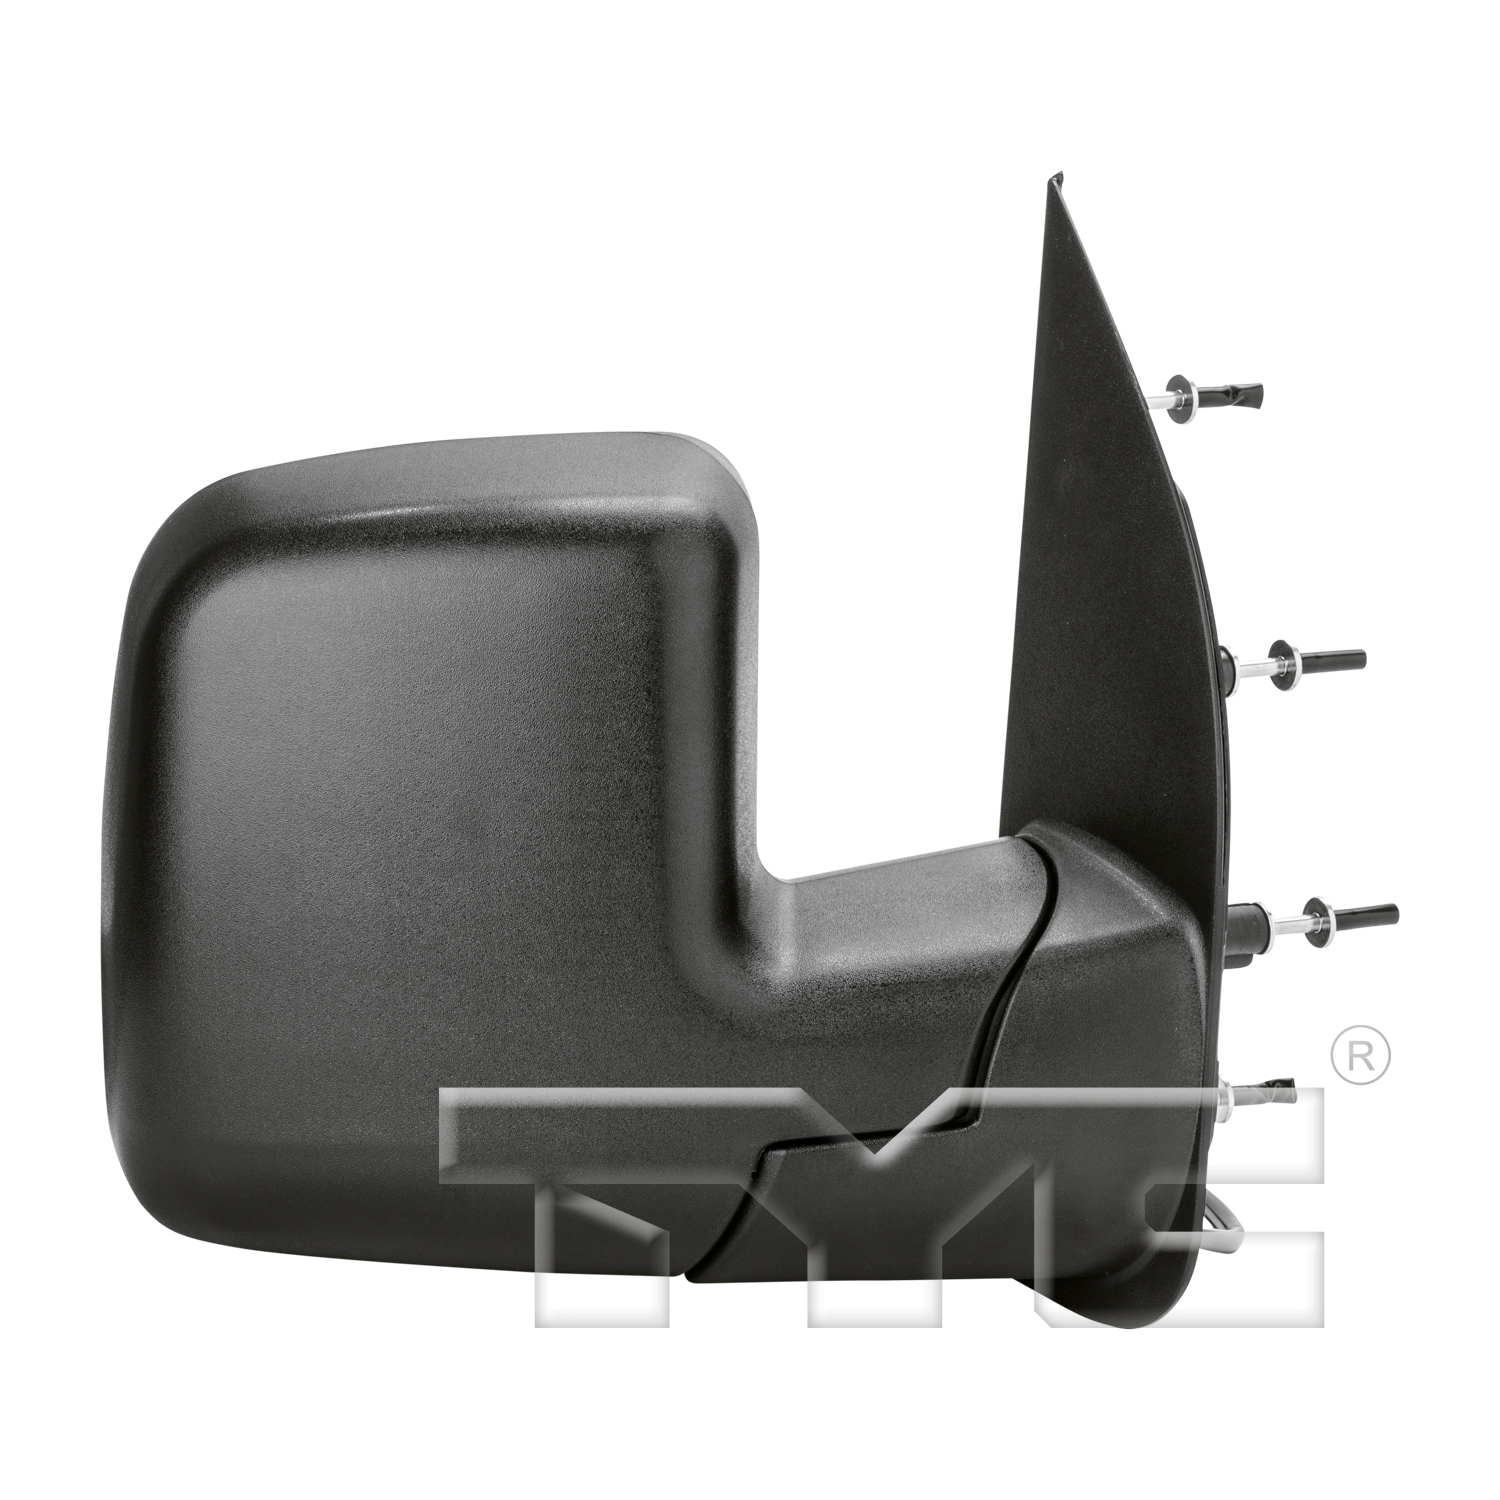 Aftermarket MIRRORS for FORD - E-150, E-150,03-06,RT Mirror outside rear view